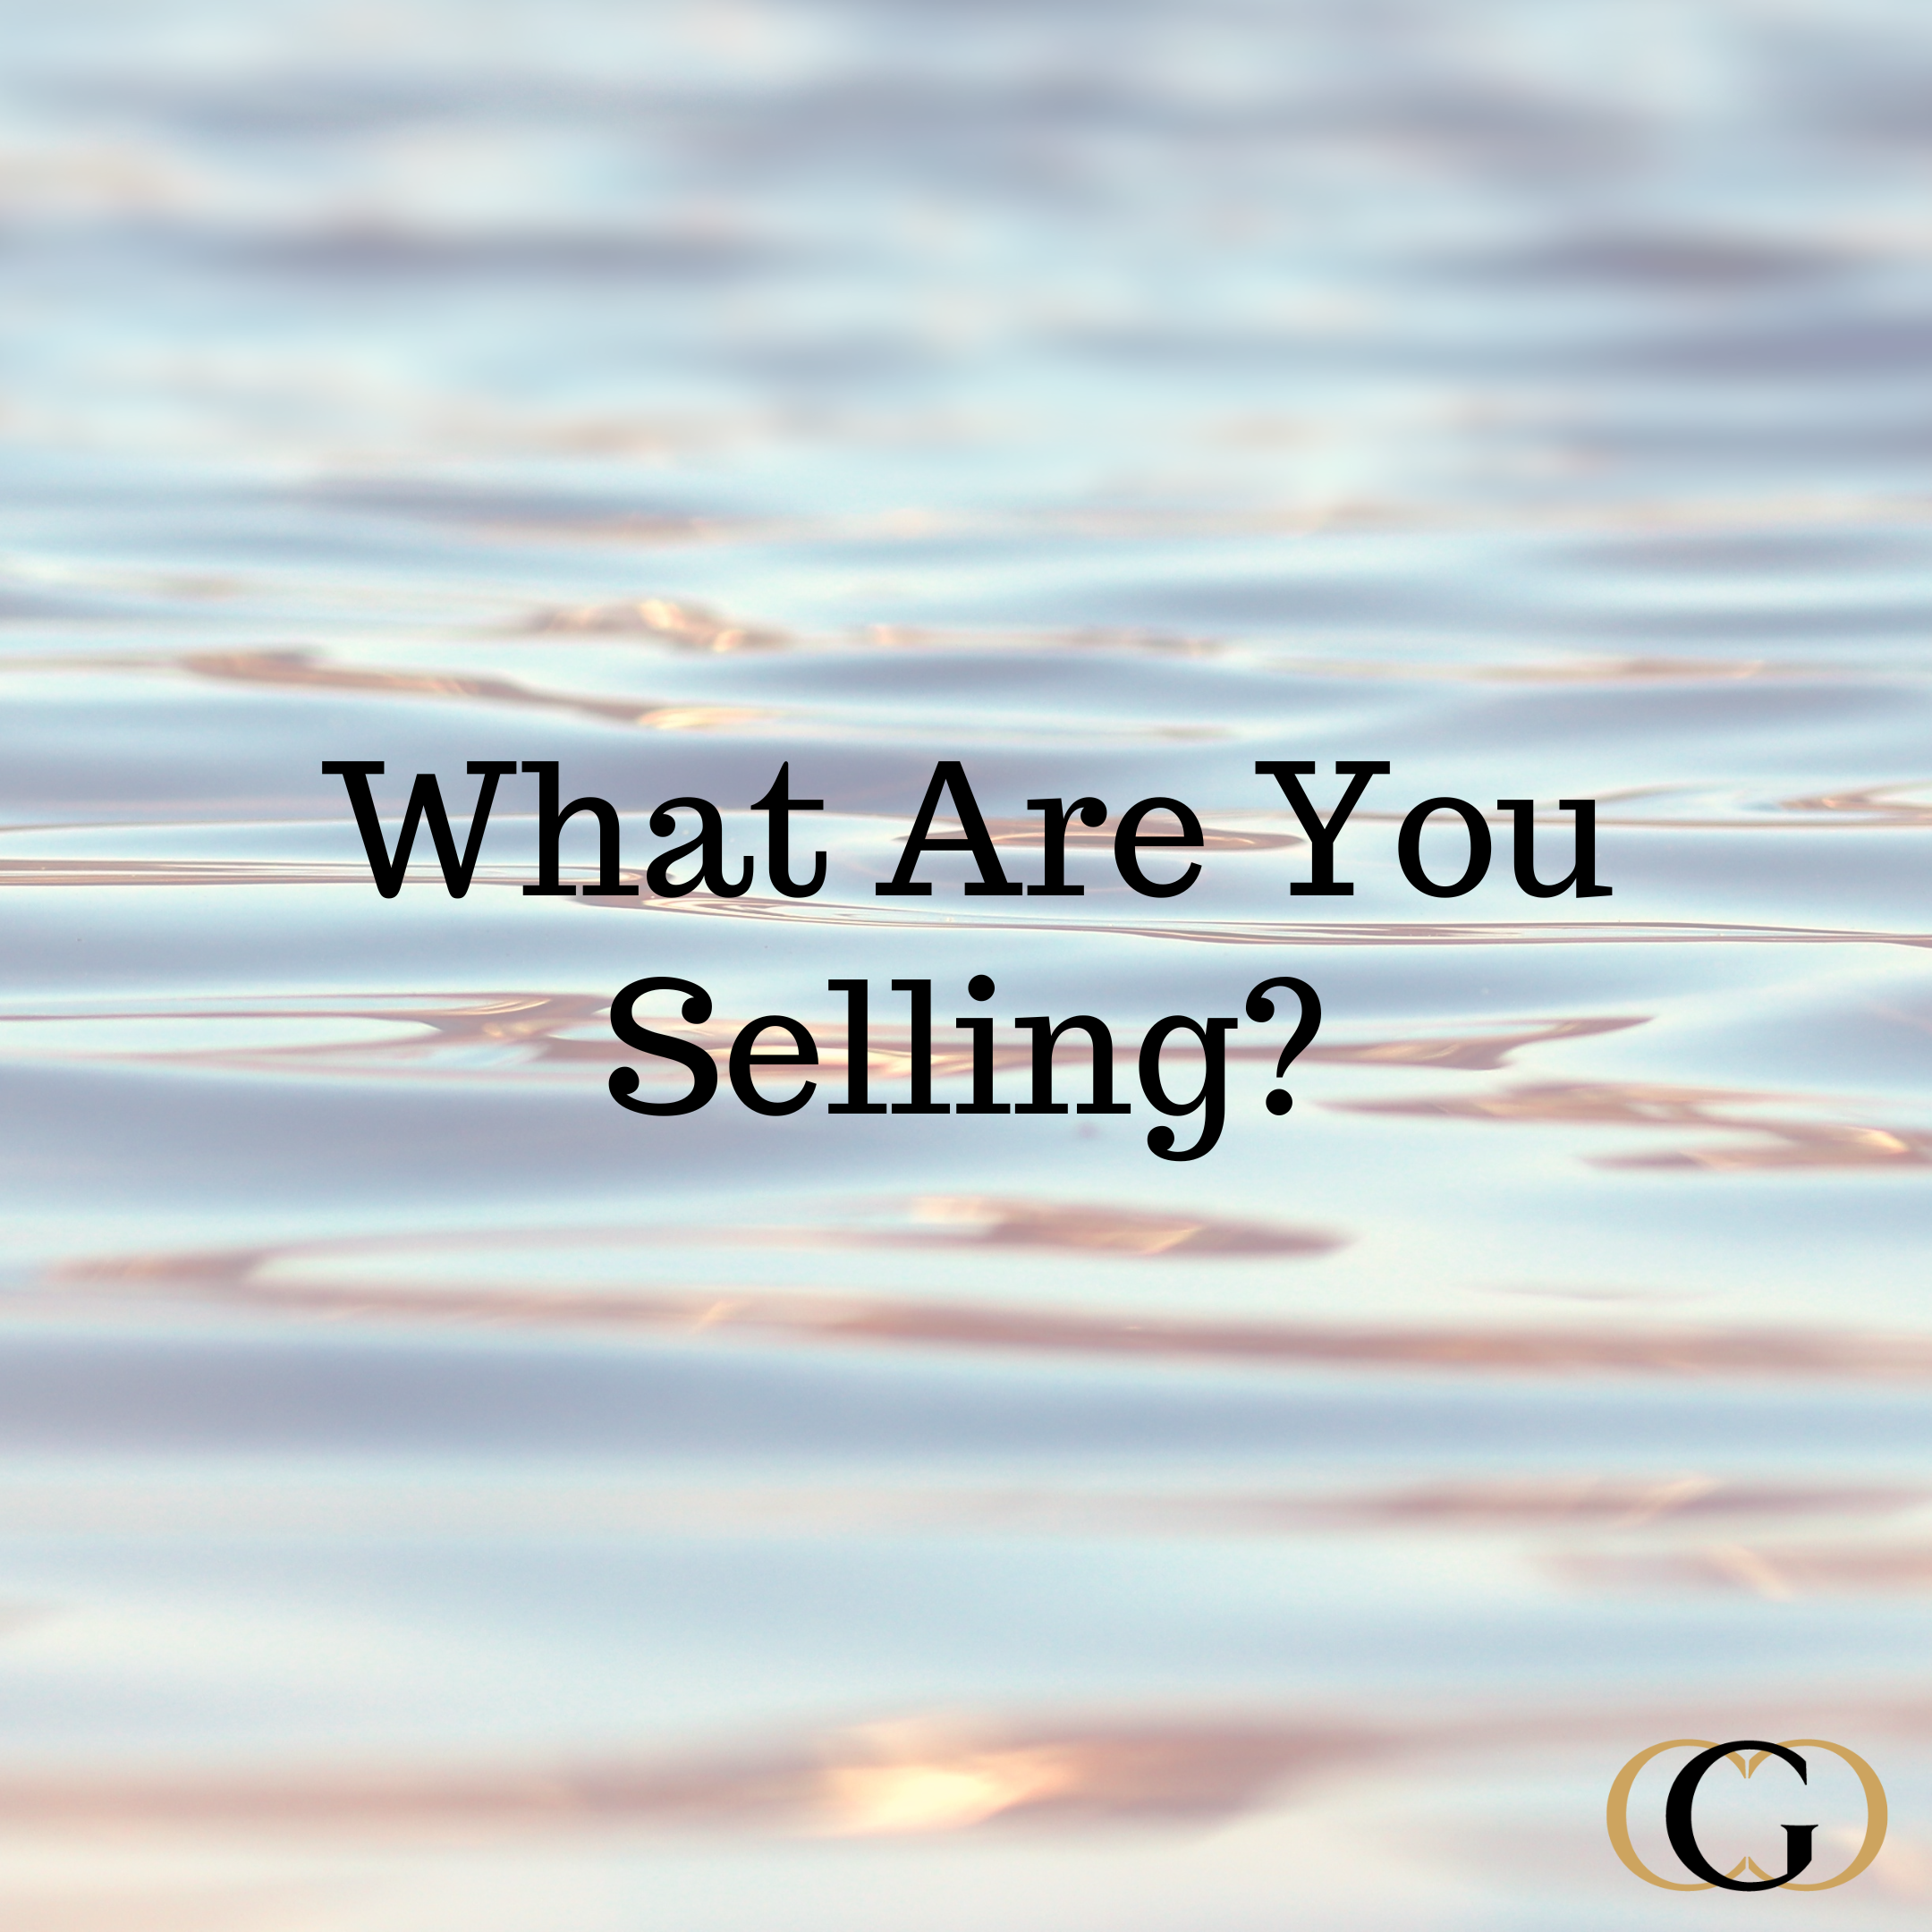 What Are You Selling?